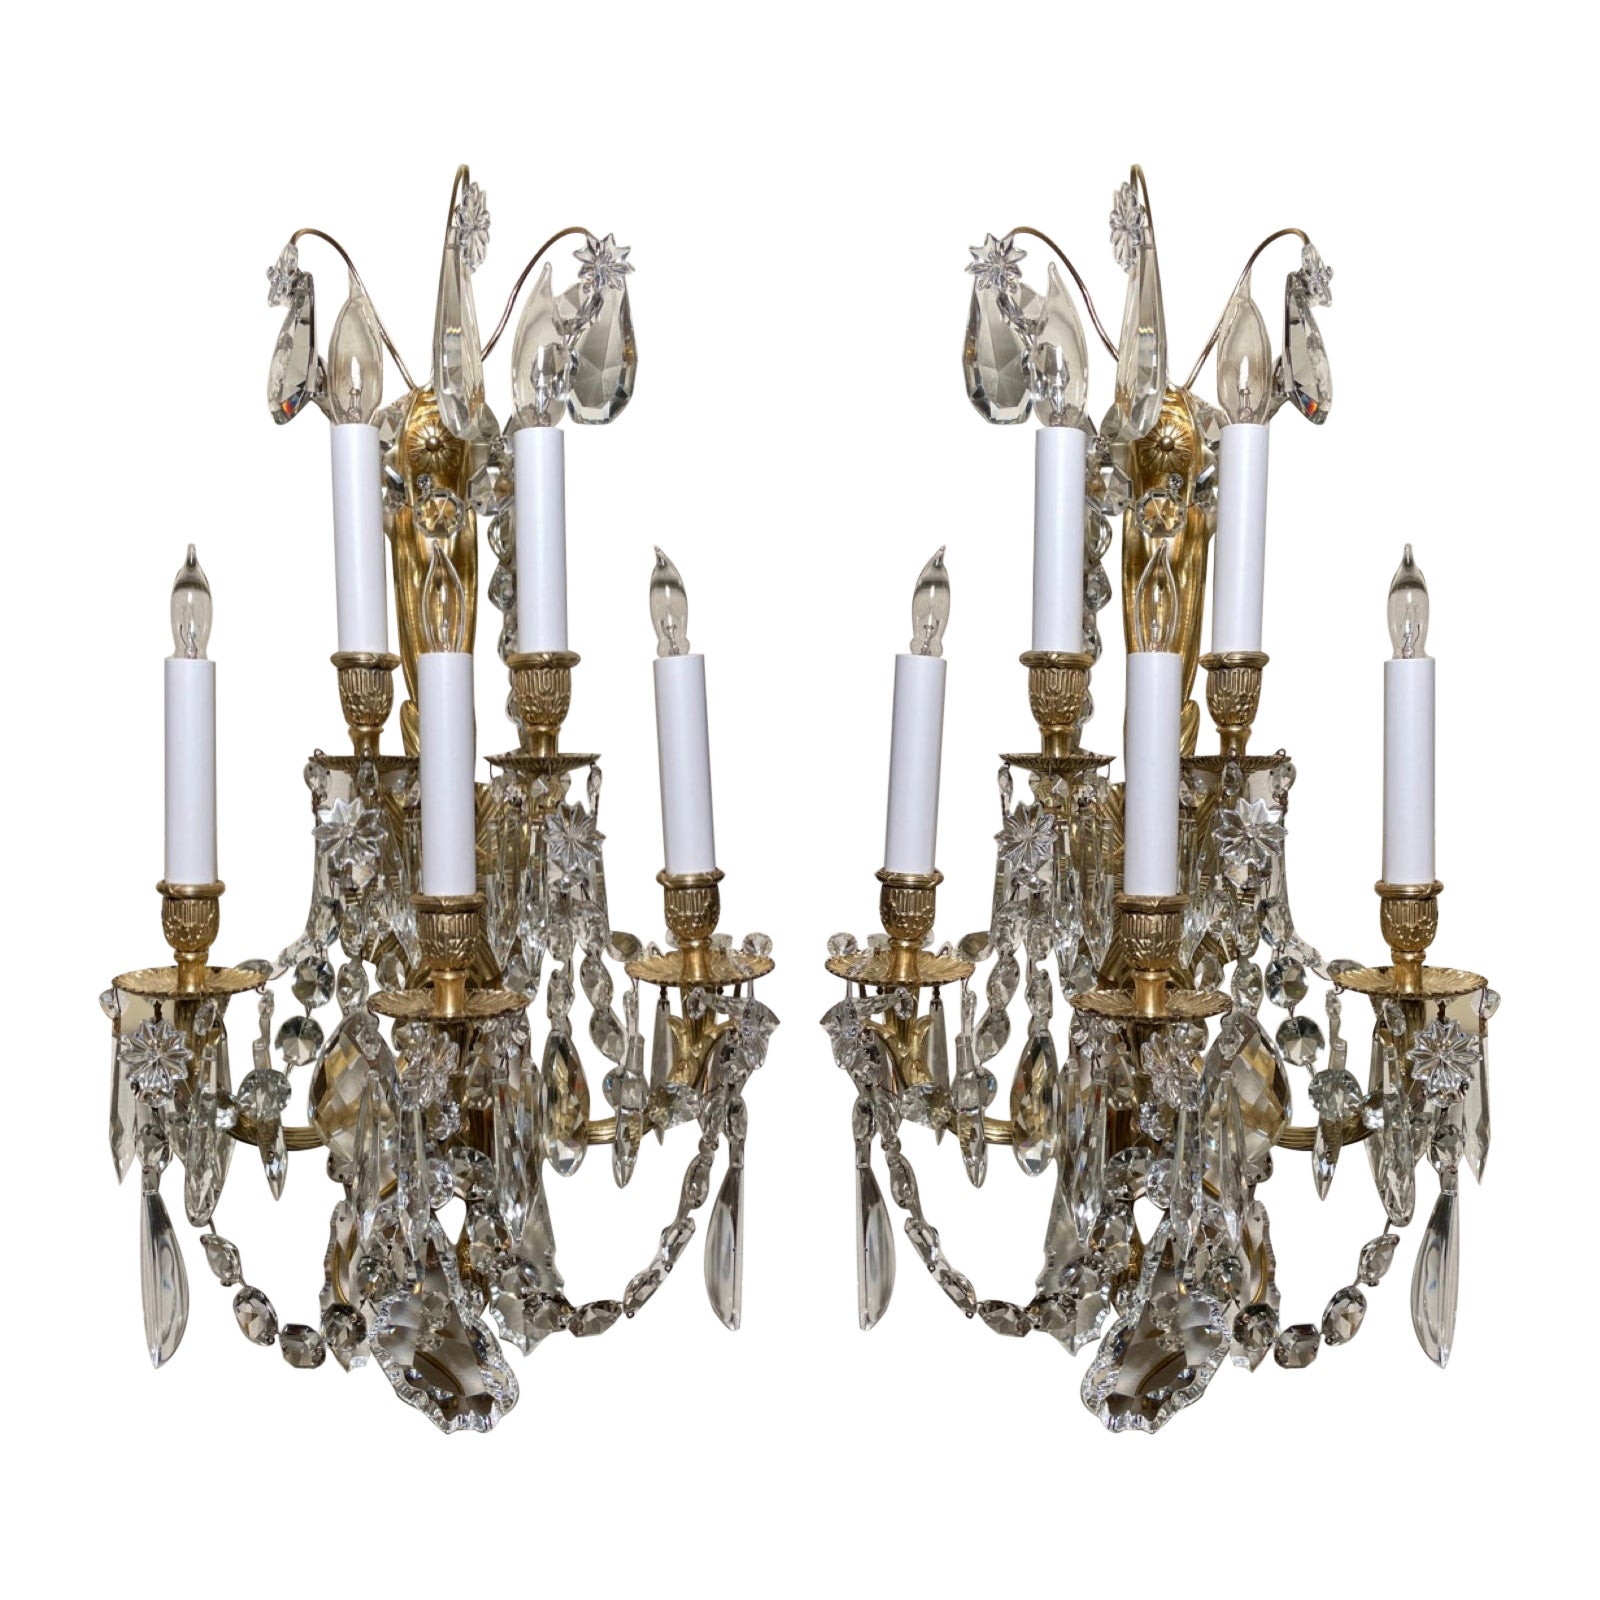 Pair Antique French Bronze D' Ore and Crystal Wall Sconces, circa 1890s